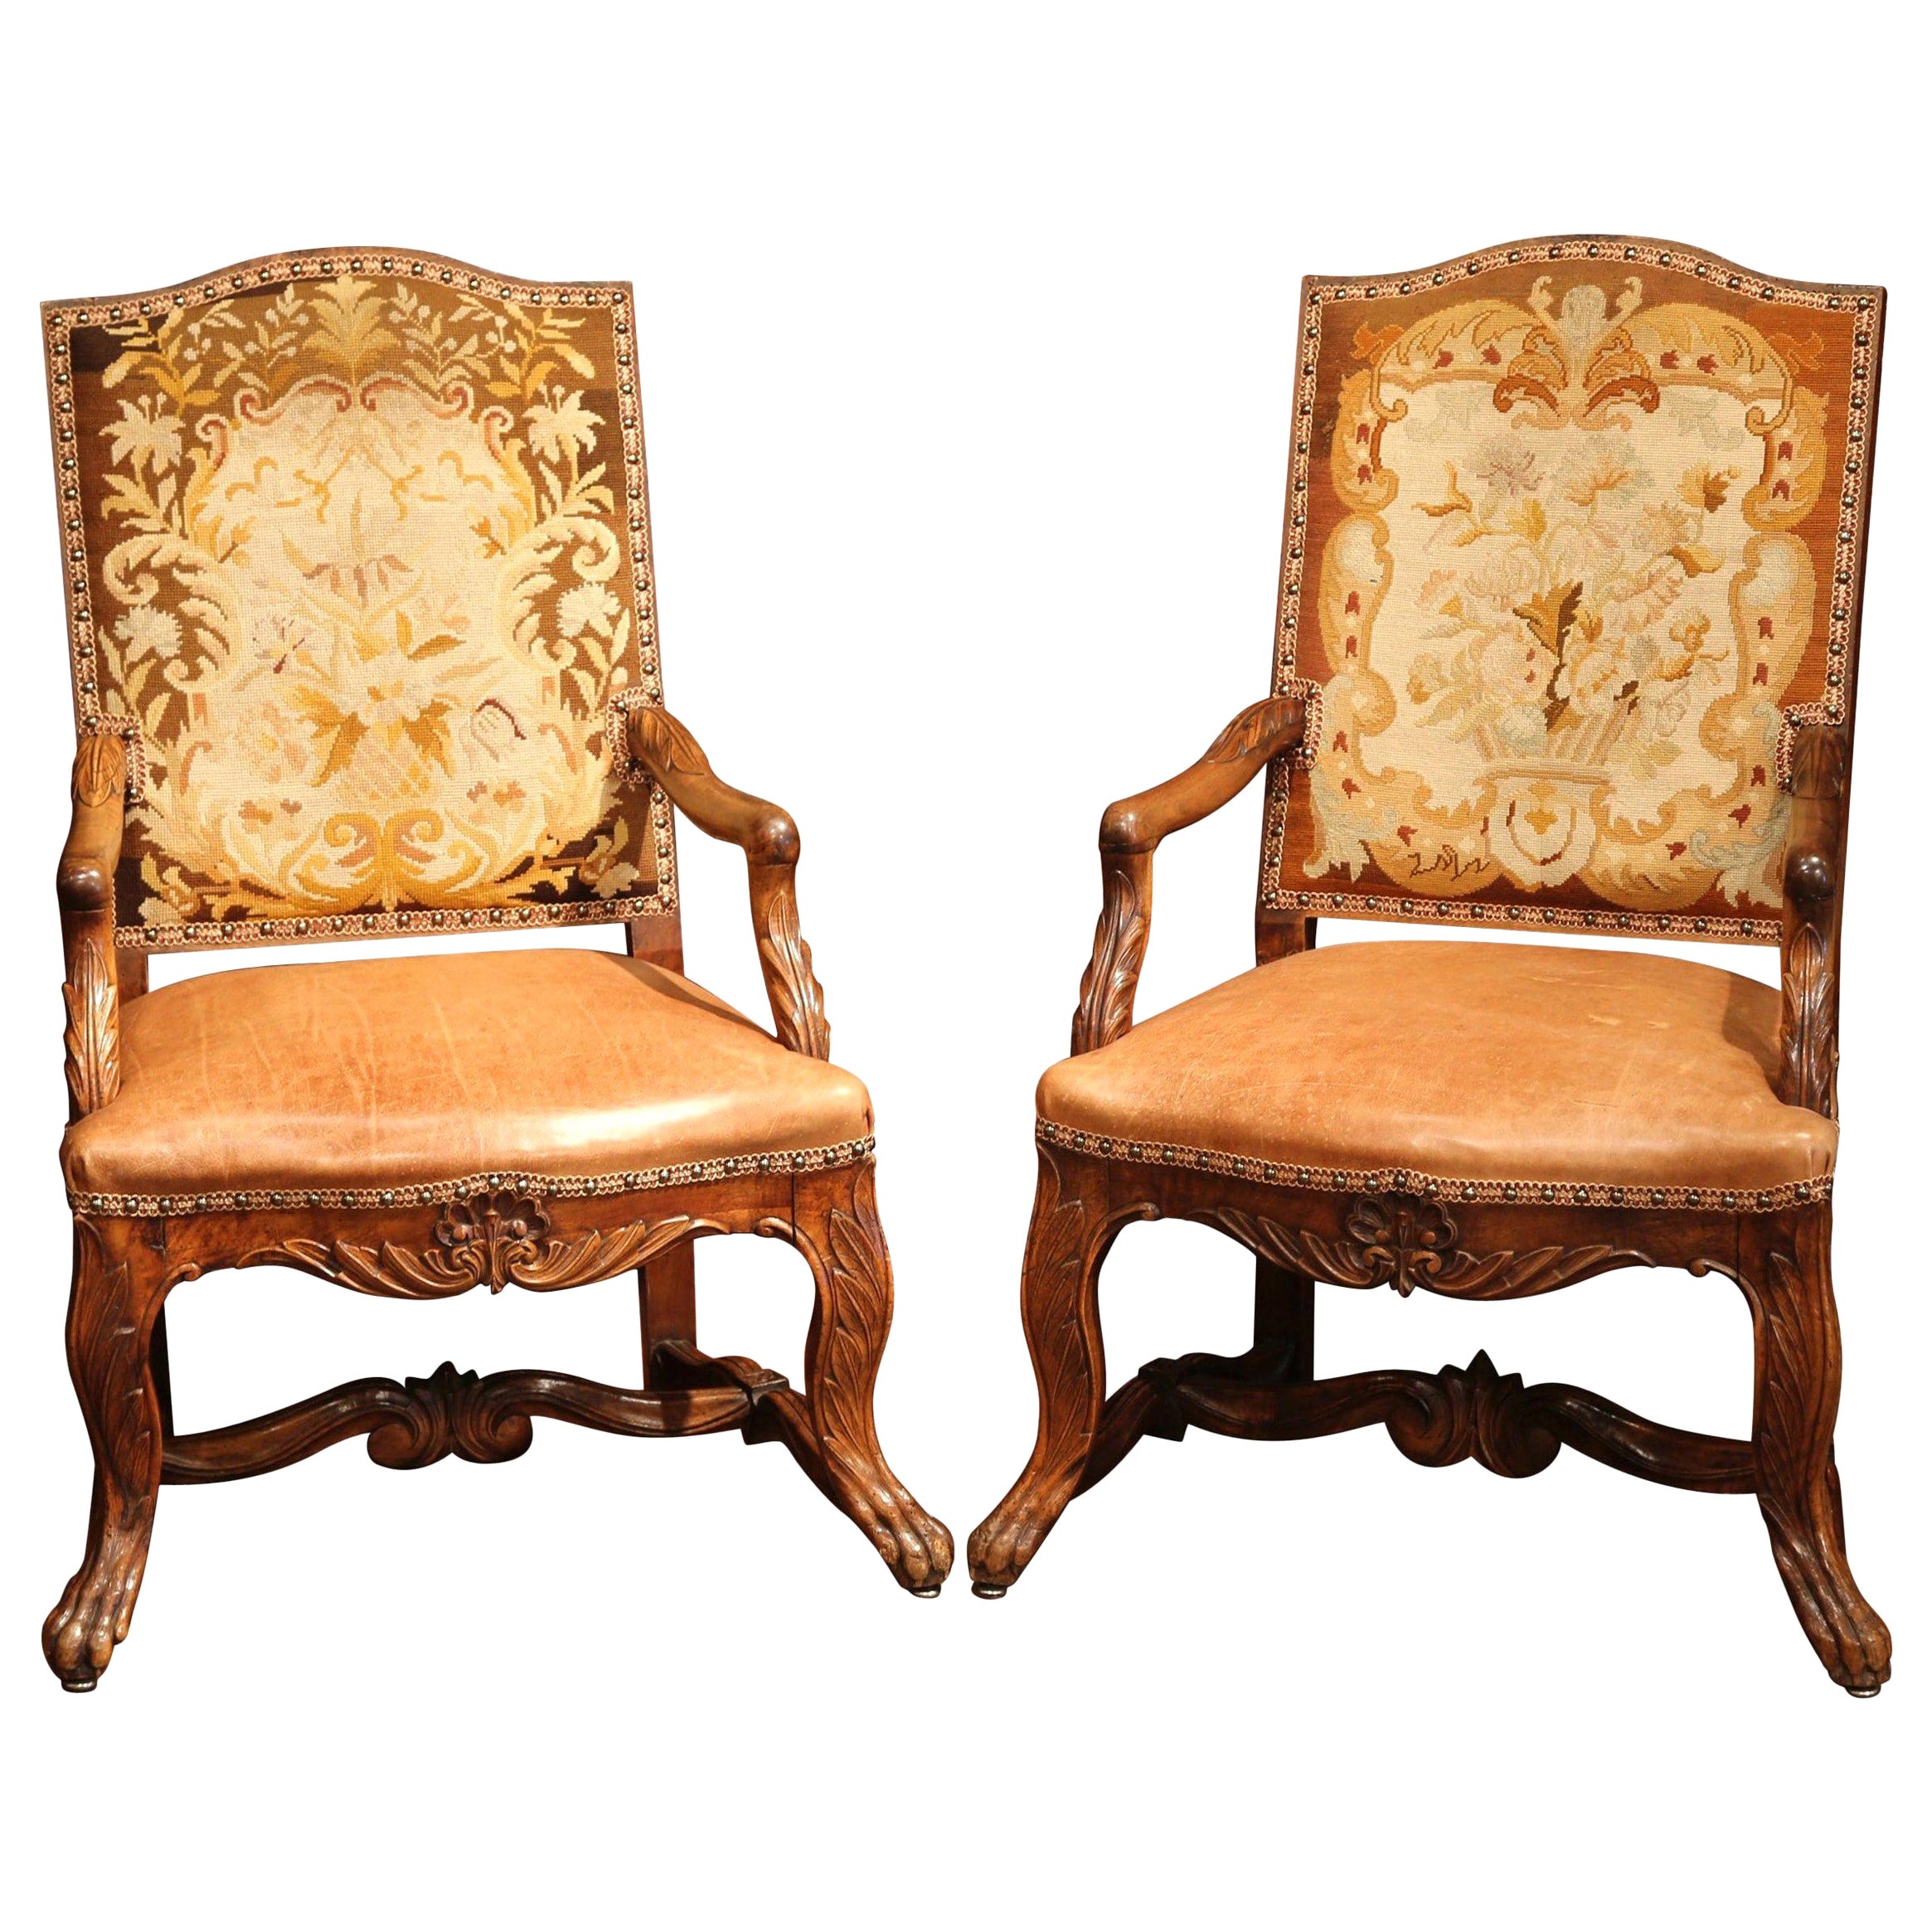 Pair of 18th Century French Carved Walnut, Leather and Needlepoint Armchairs